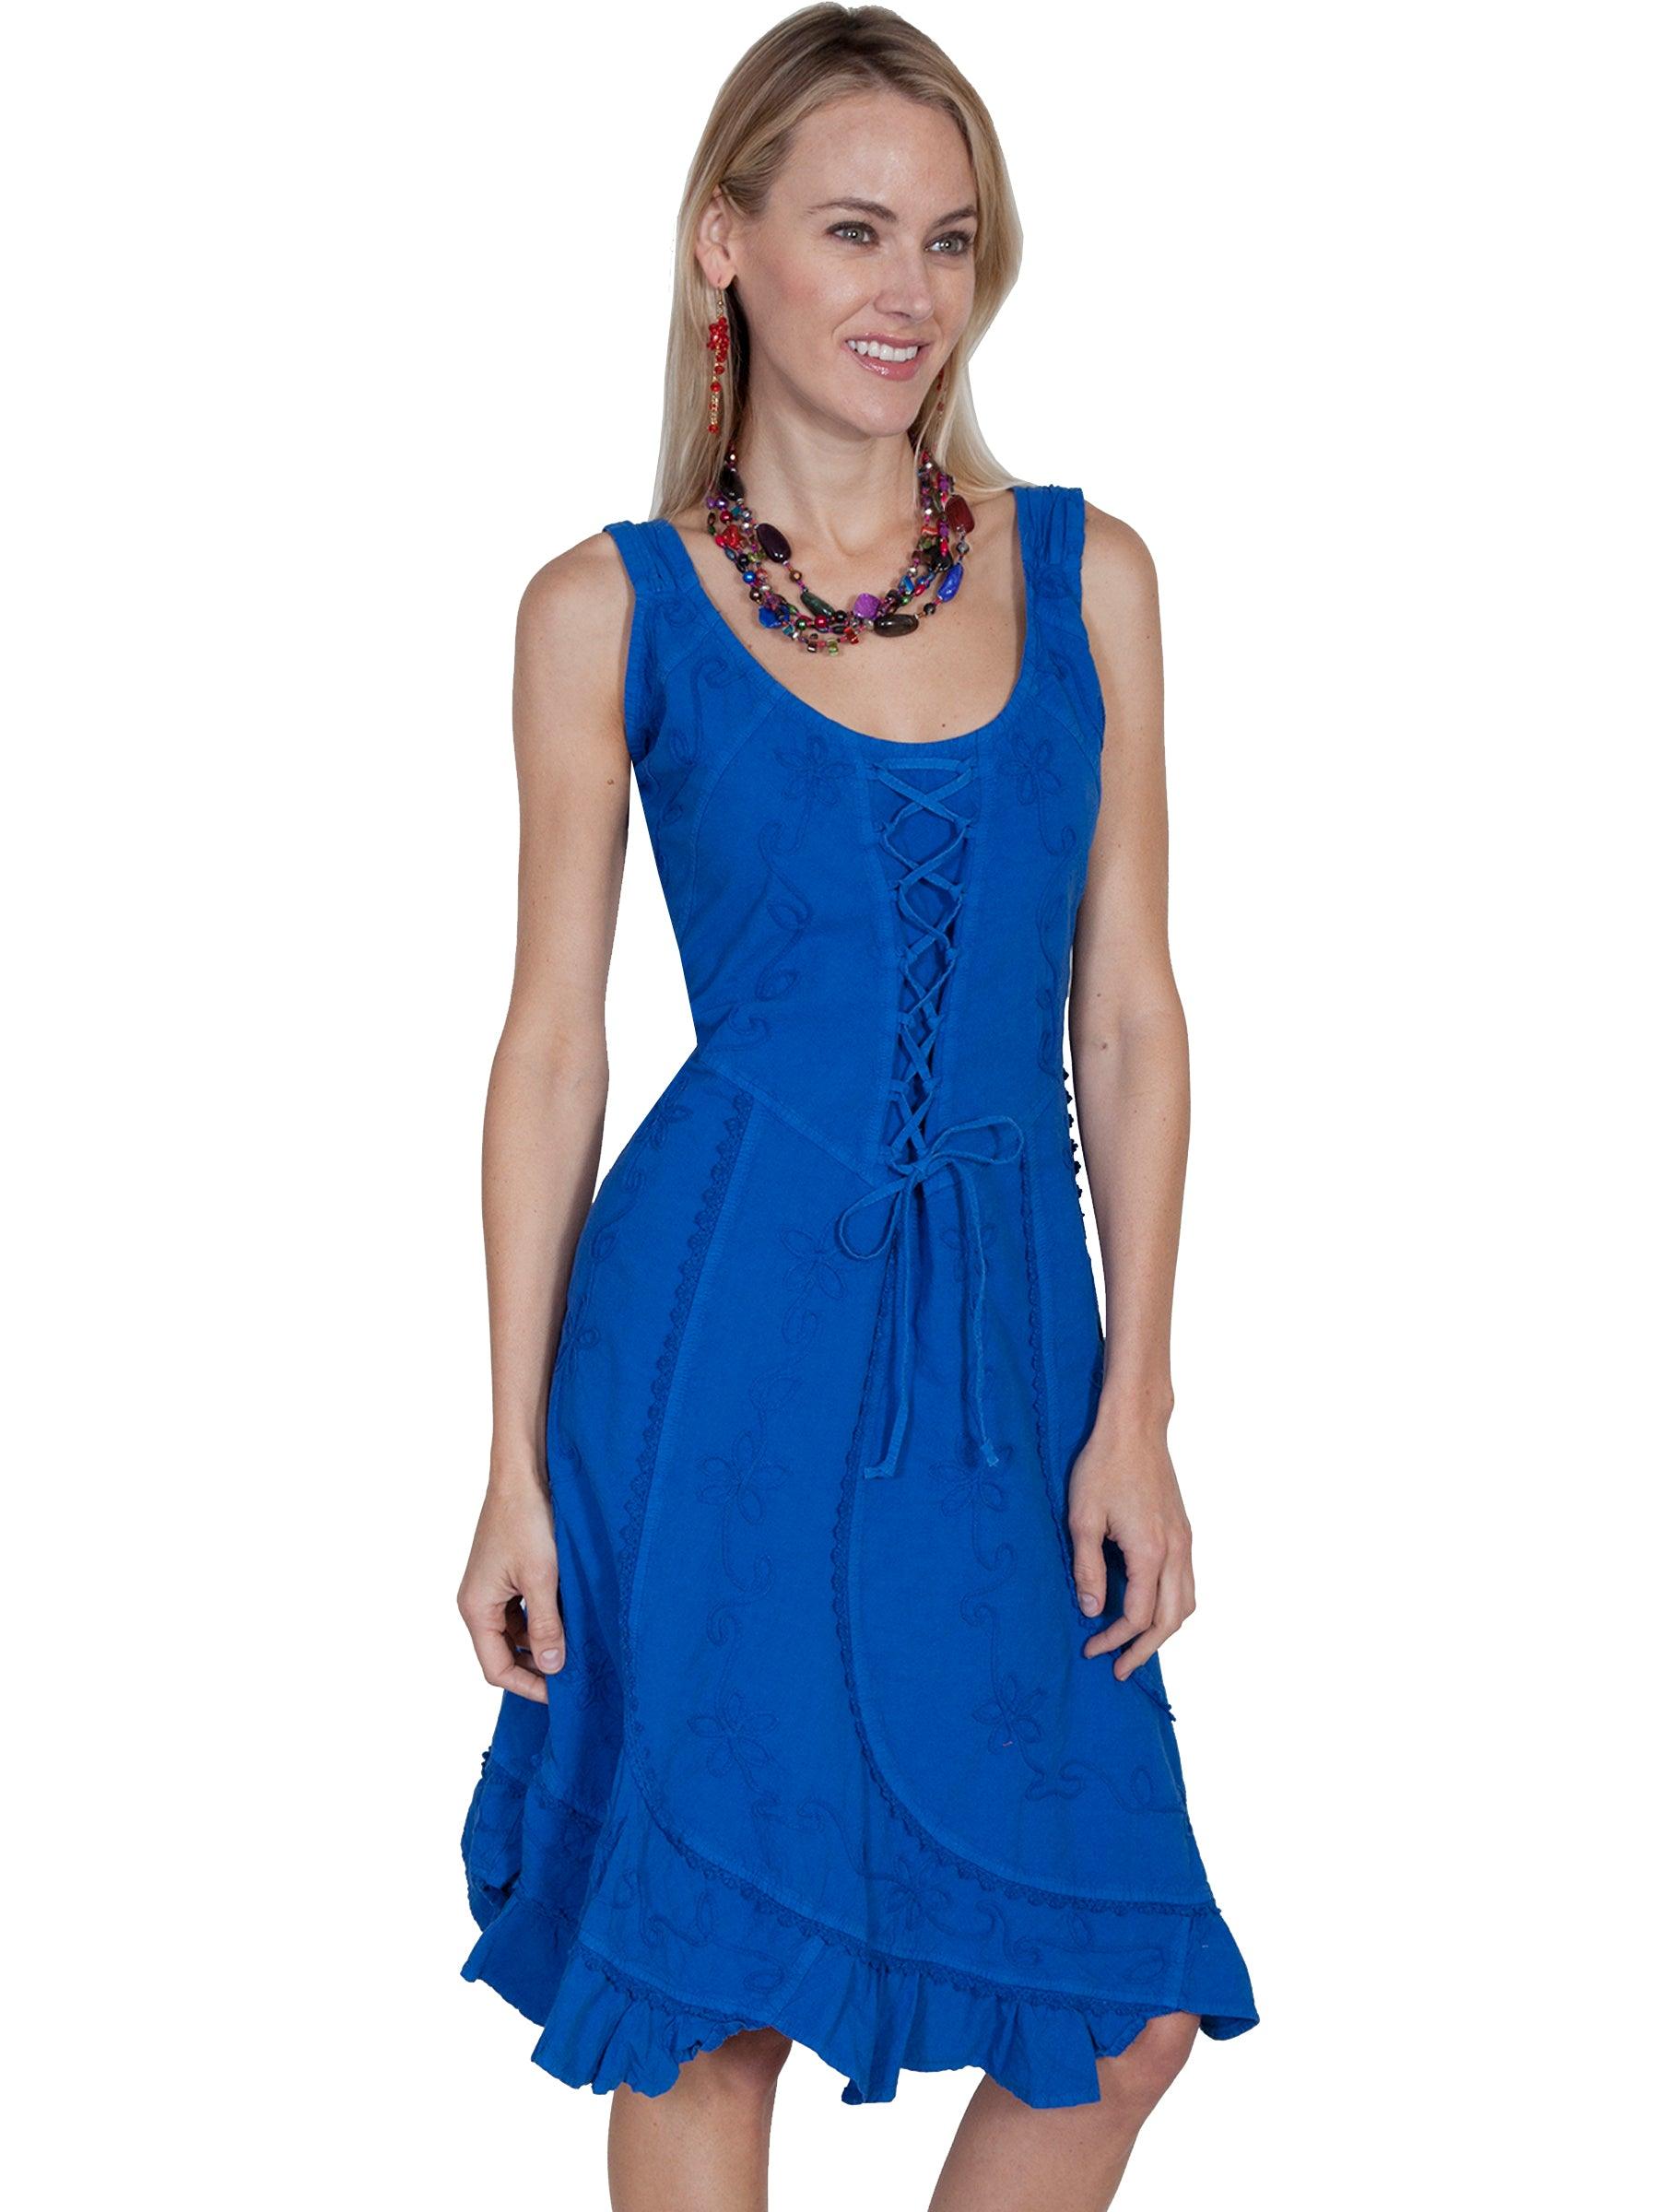 Scully DAZZLING BLUE S/L FRONT & BACK LACE UP DRESS - Flyclothing LLC